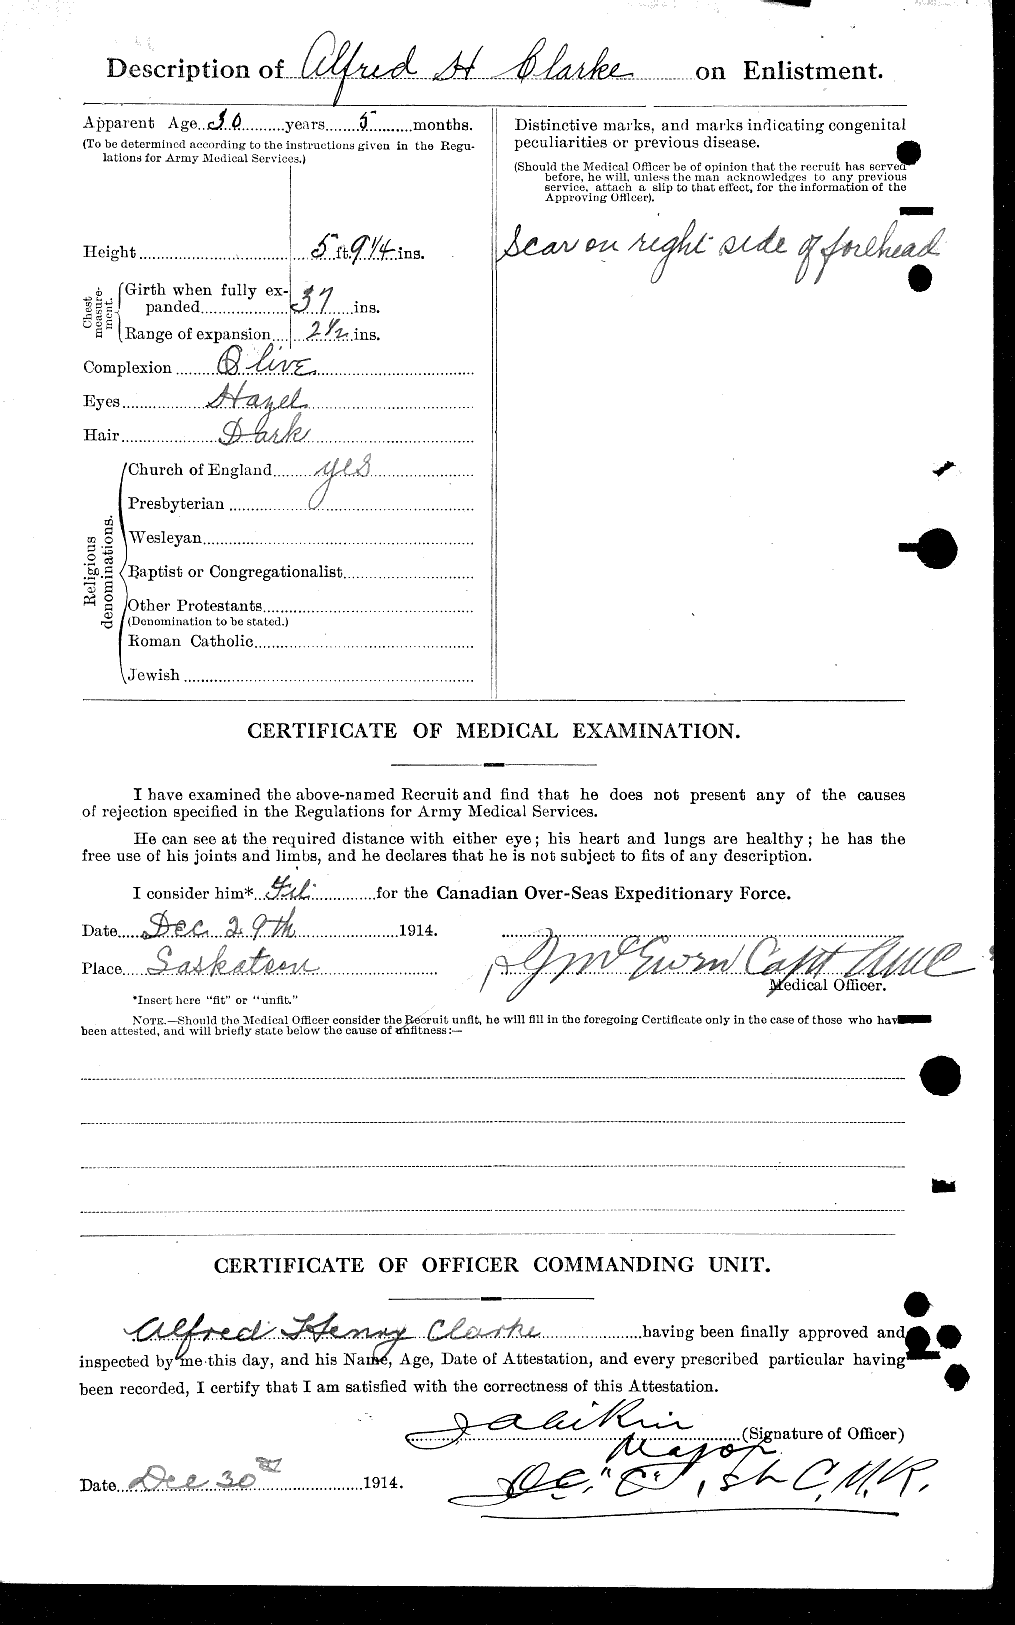 Personnel Records of the First World War - CEF 022786b